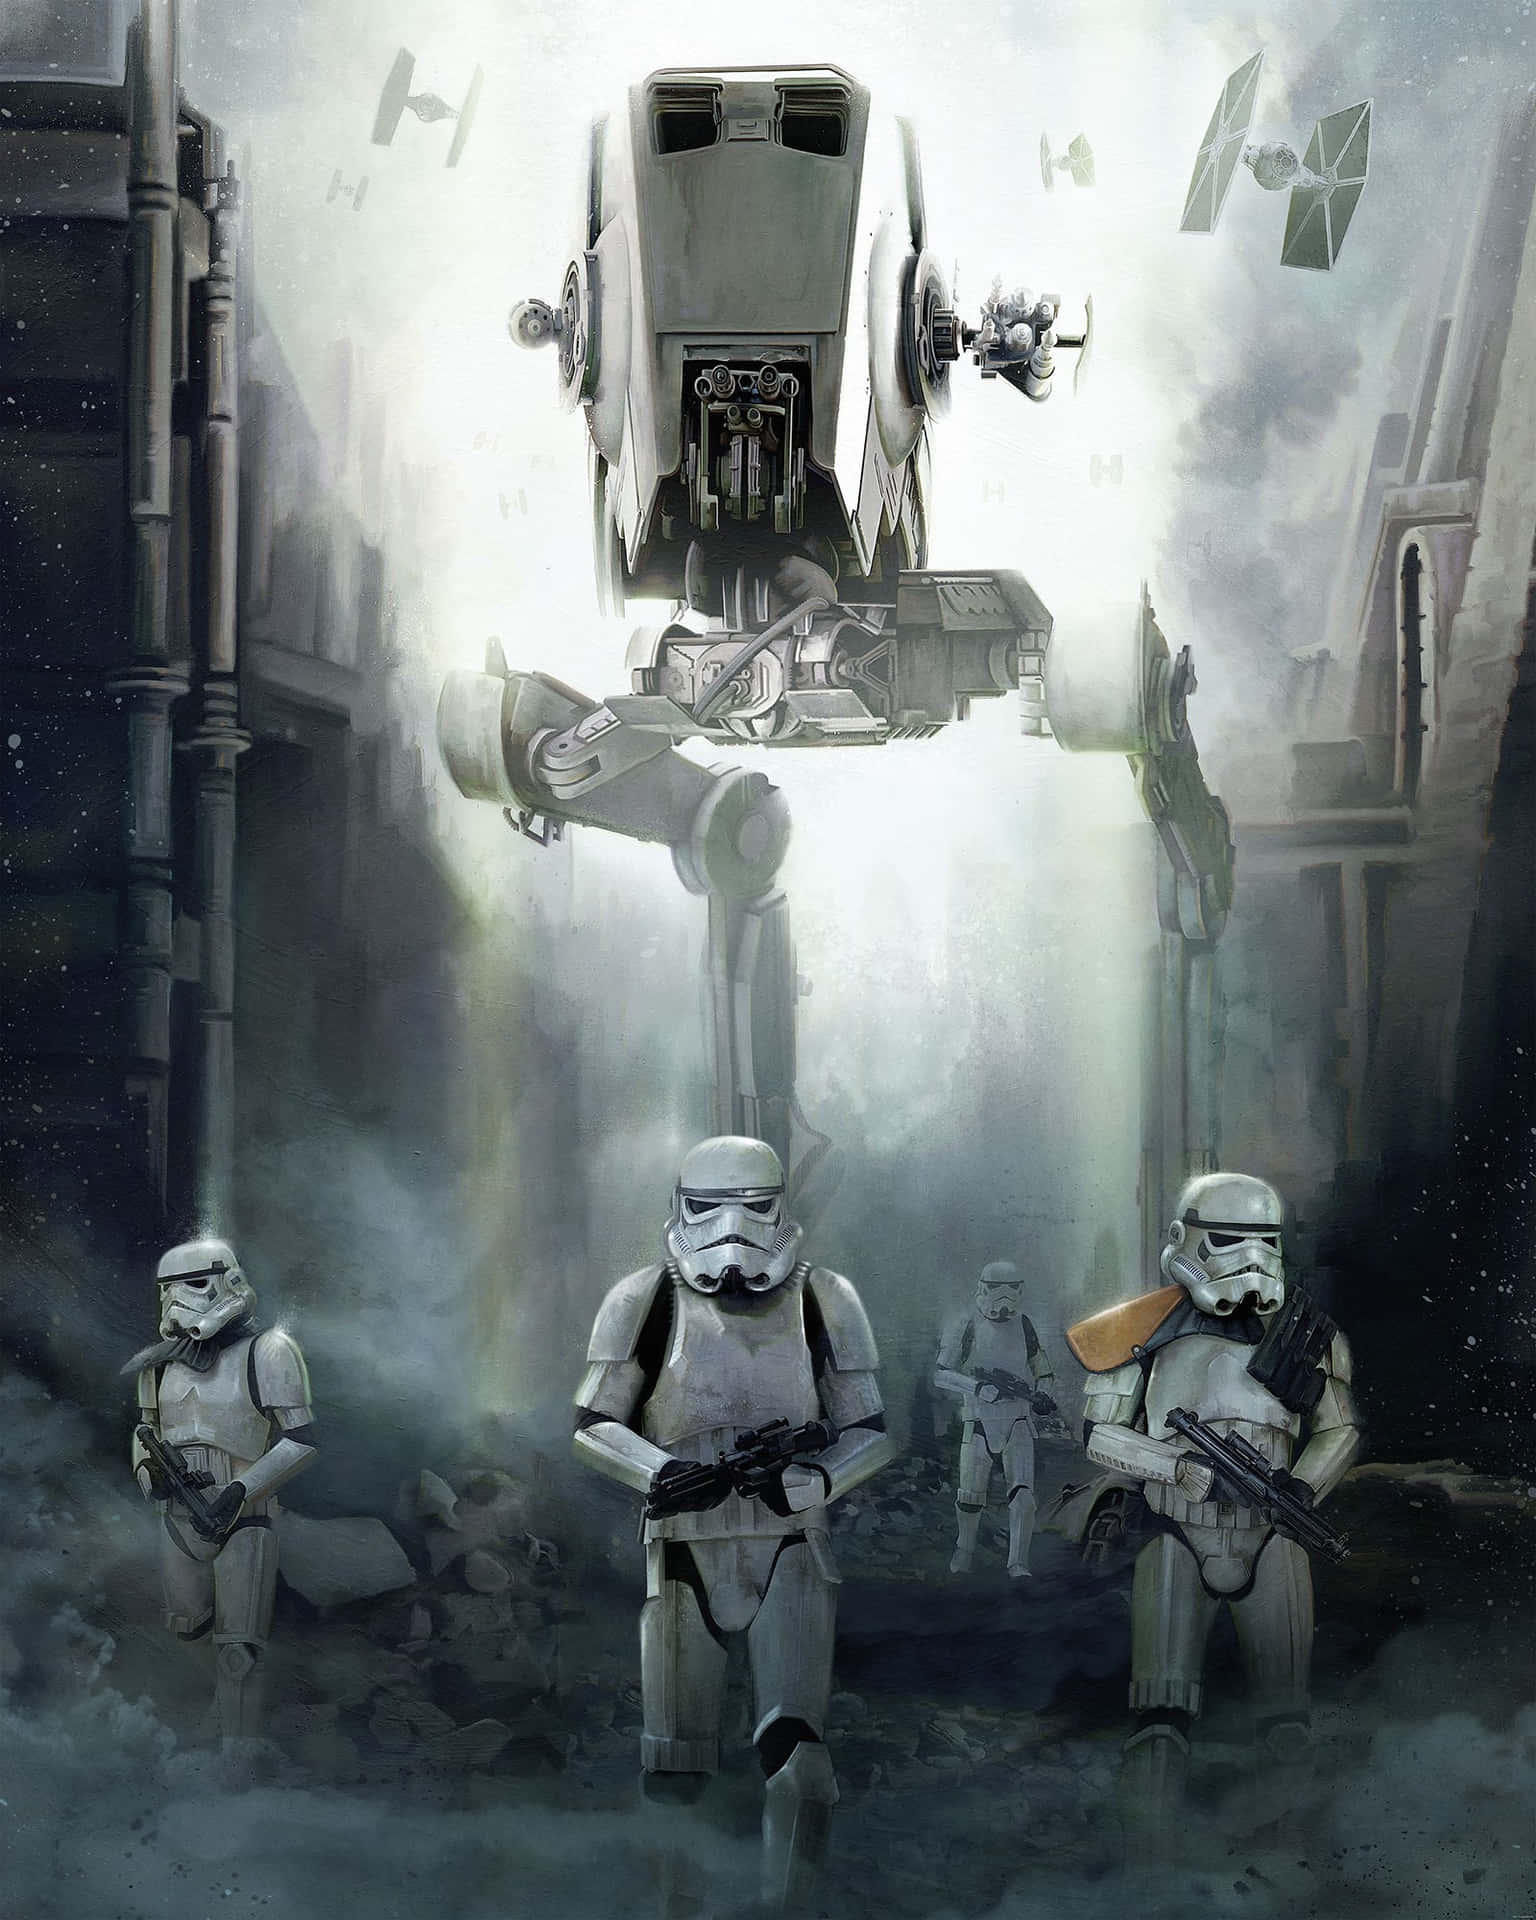 Imperial Forces Of Stormtroopers And At-at Wallpaper